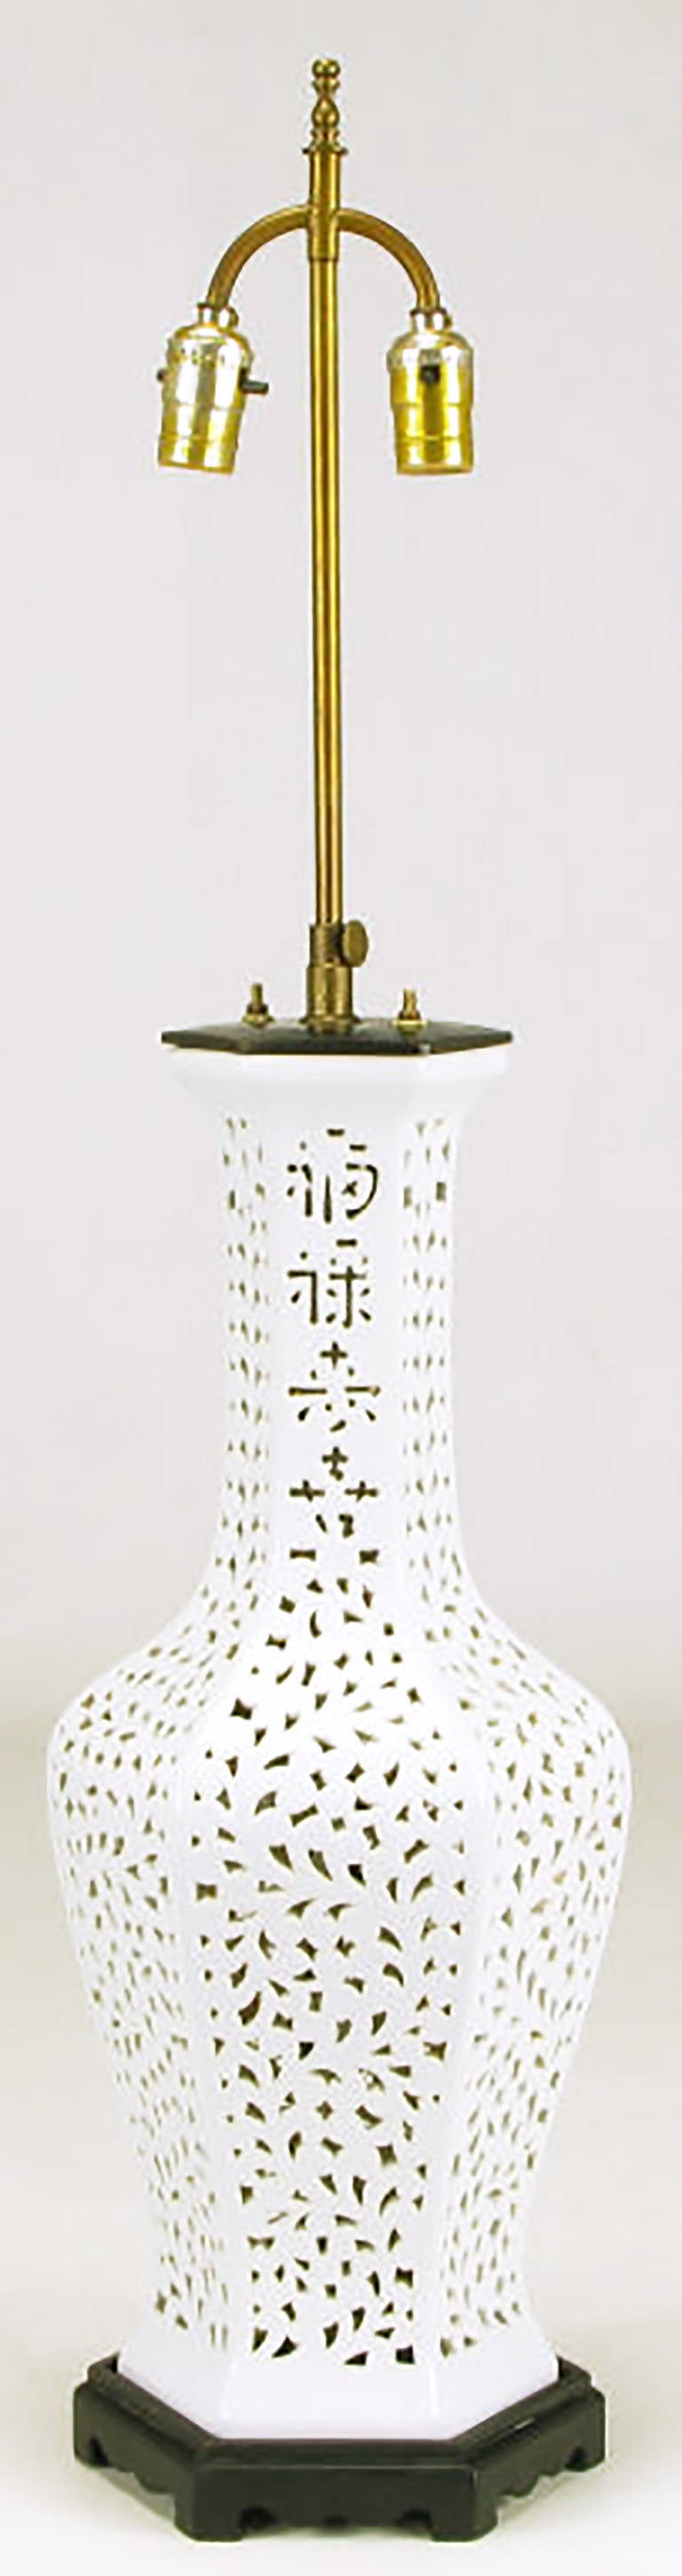 Reticulated Blanc de Chine table lamp in hexagonal vase form, with Asian character design in the neck. Black lacquered wood base and metal cap with brass stem and dual socket illumination. Sold sans shade.